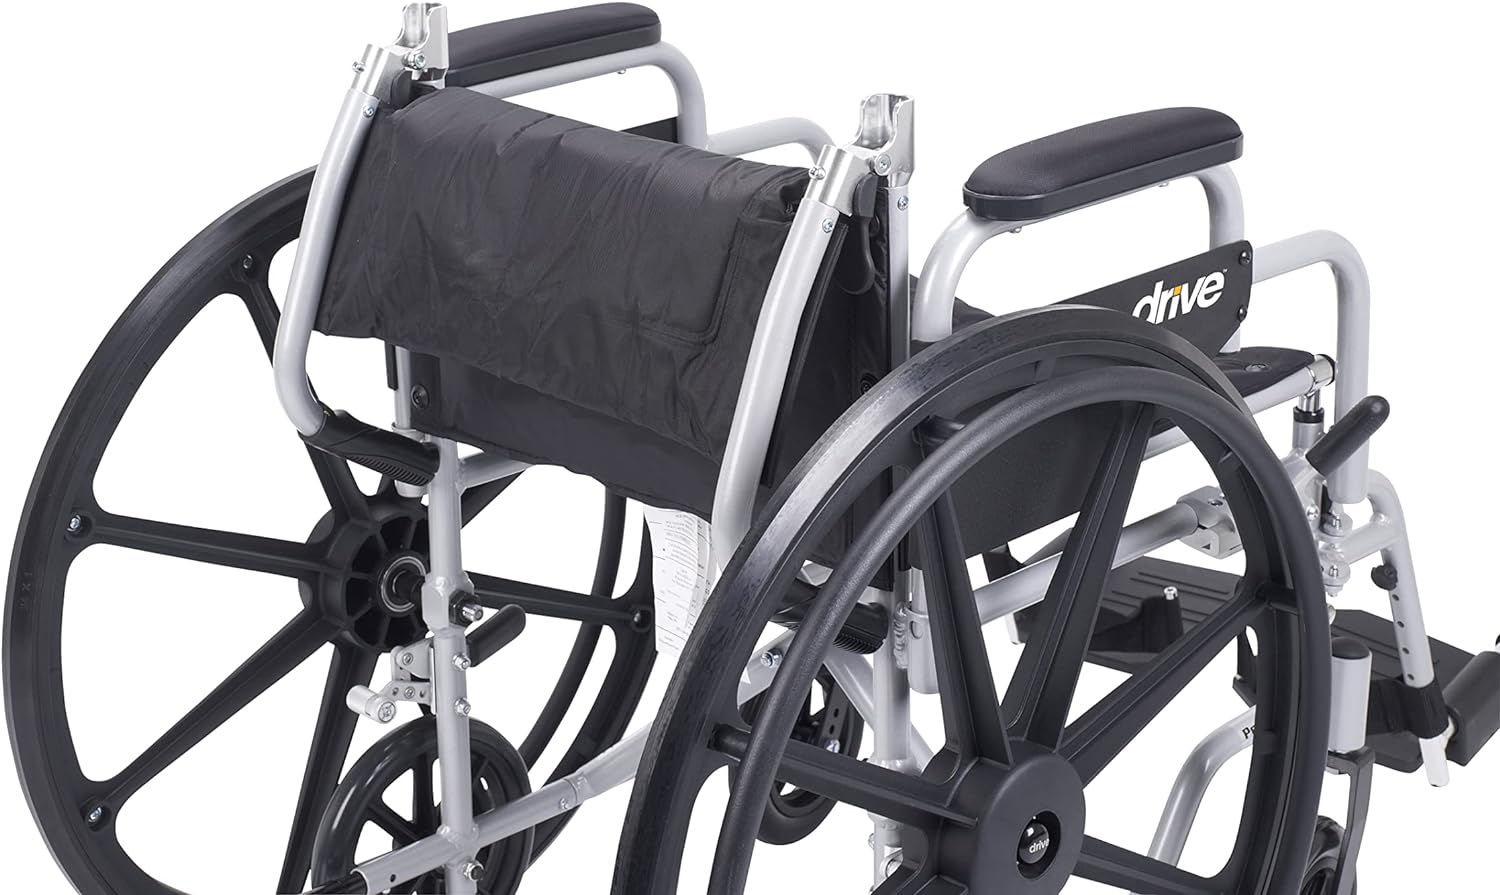 Poly Fly Wheelchair